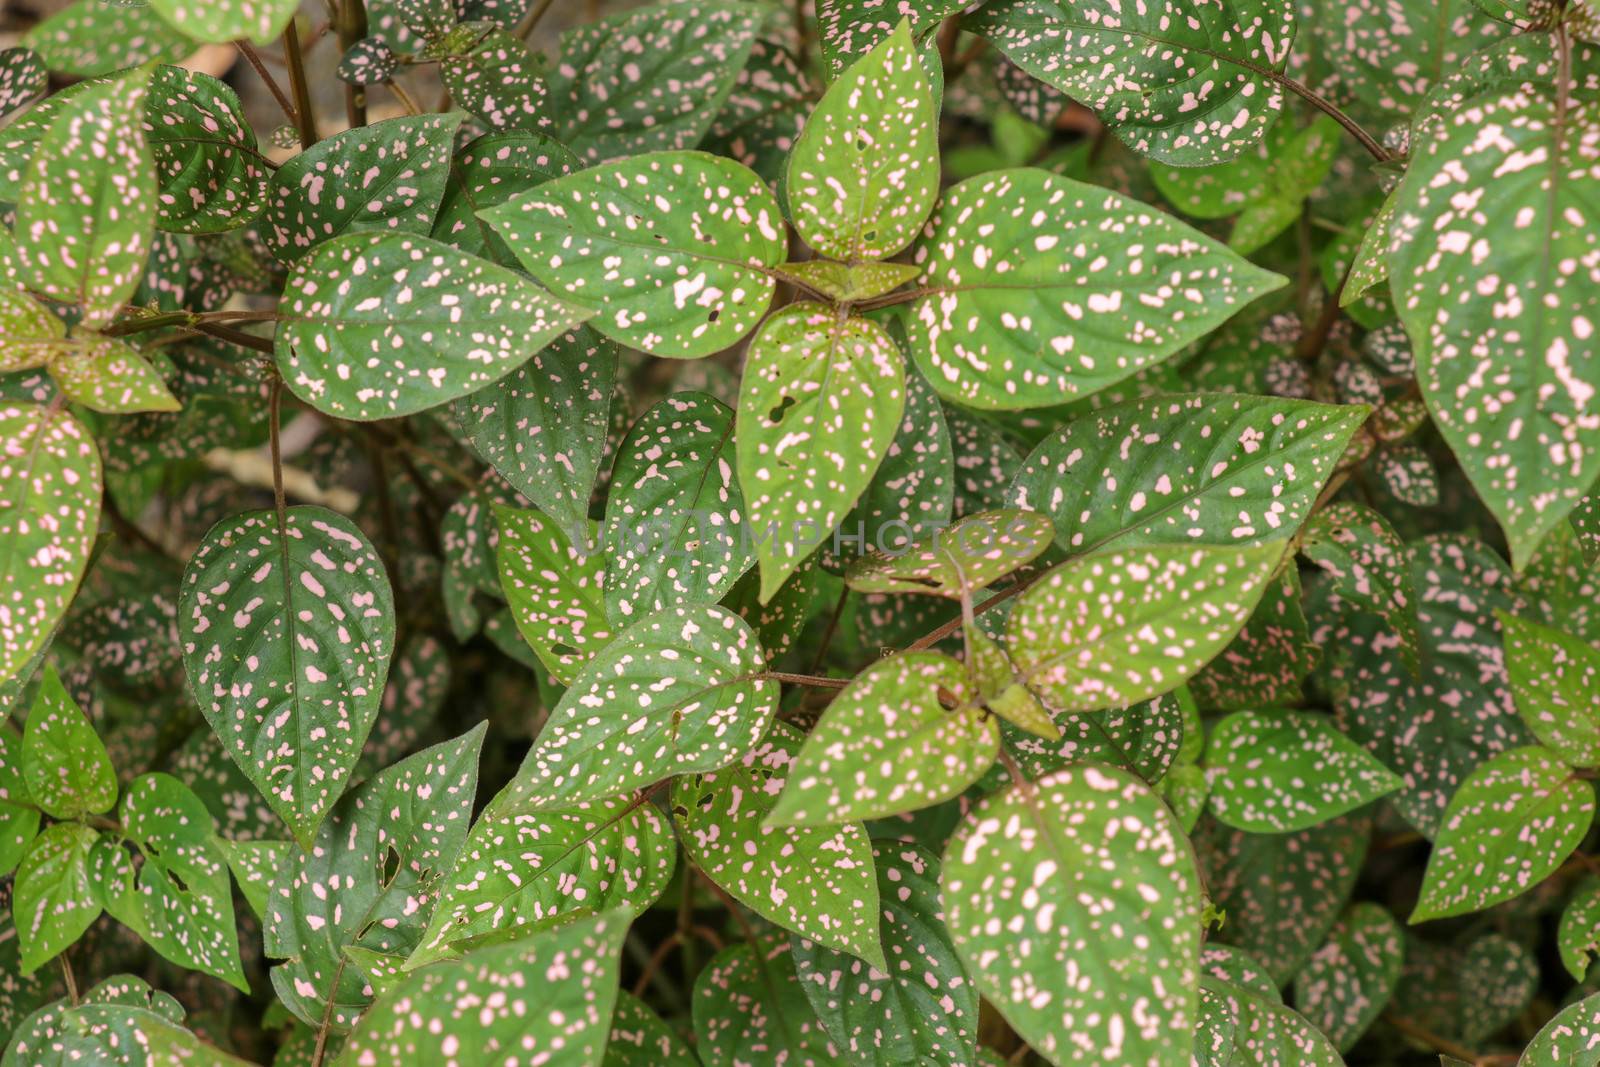 Hypoestes Phyllostachya with pink spotted leaves in tropical jungle, Bali island in Indonesia.Close up of ornamental leaf plant Polka Dot plant. Ornamental plant patterned foliage grown in rainforest.